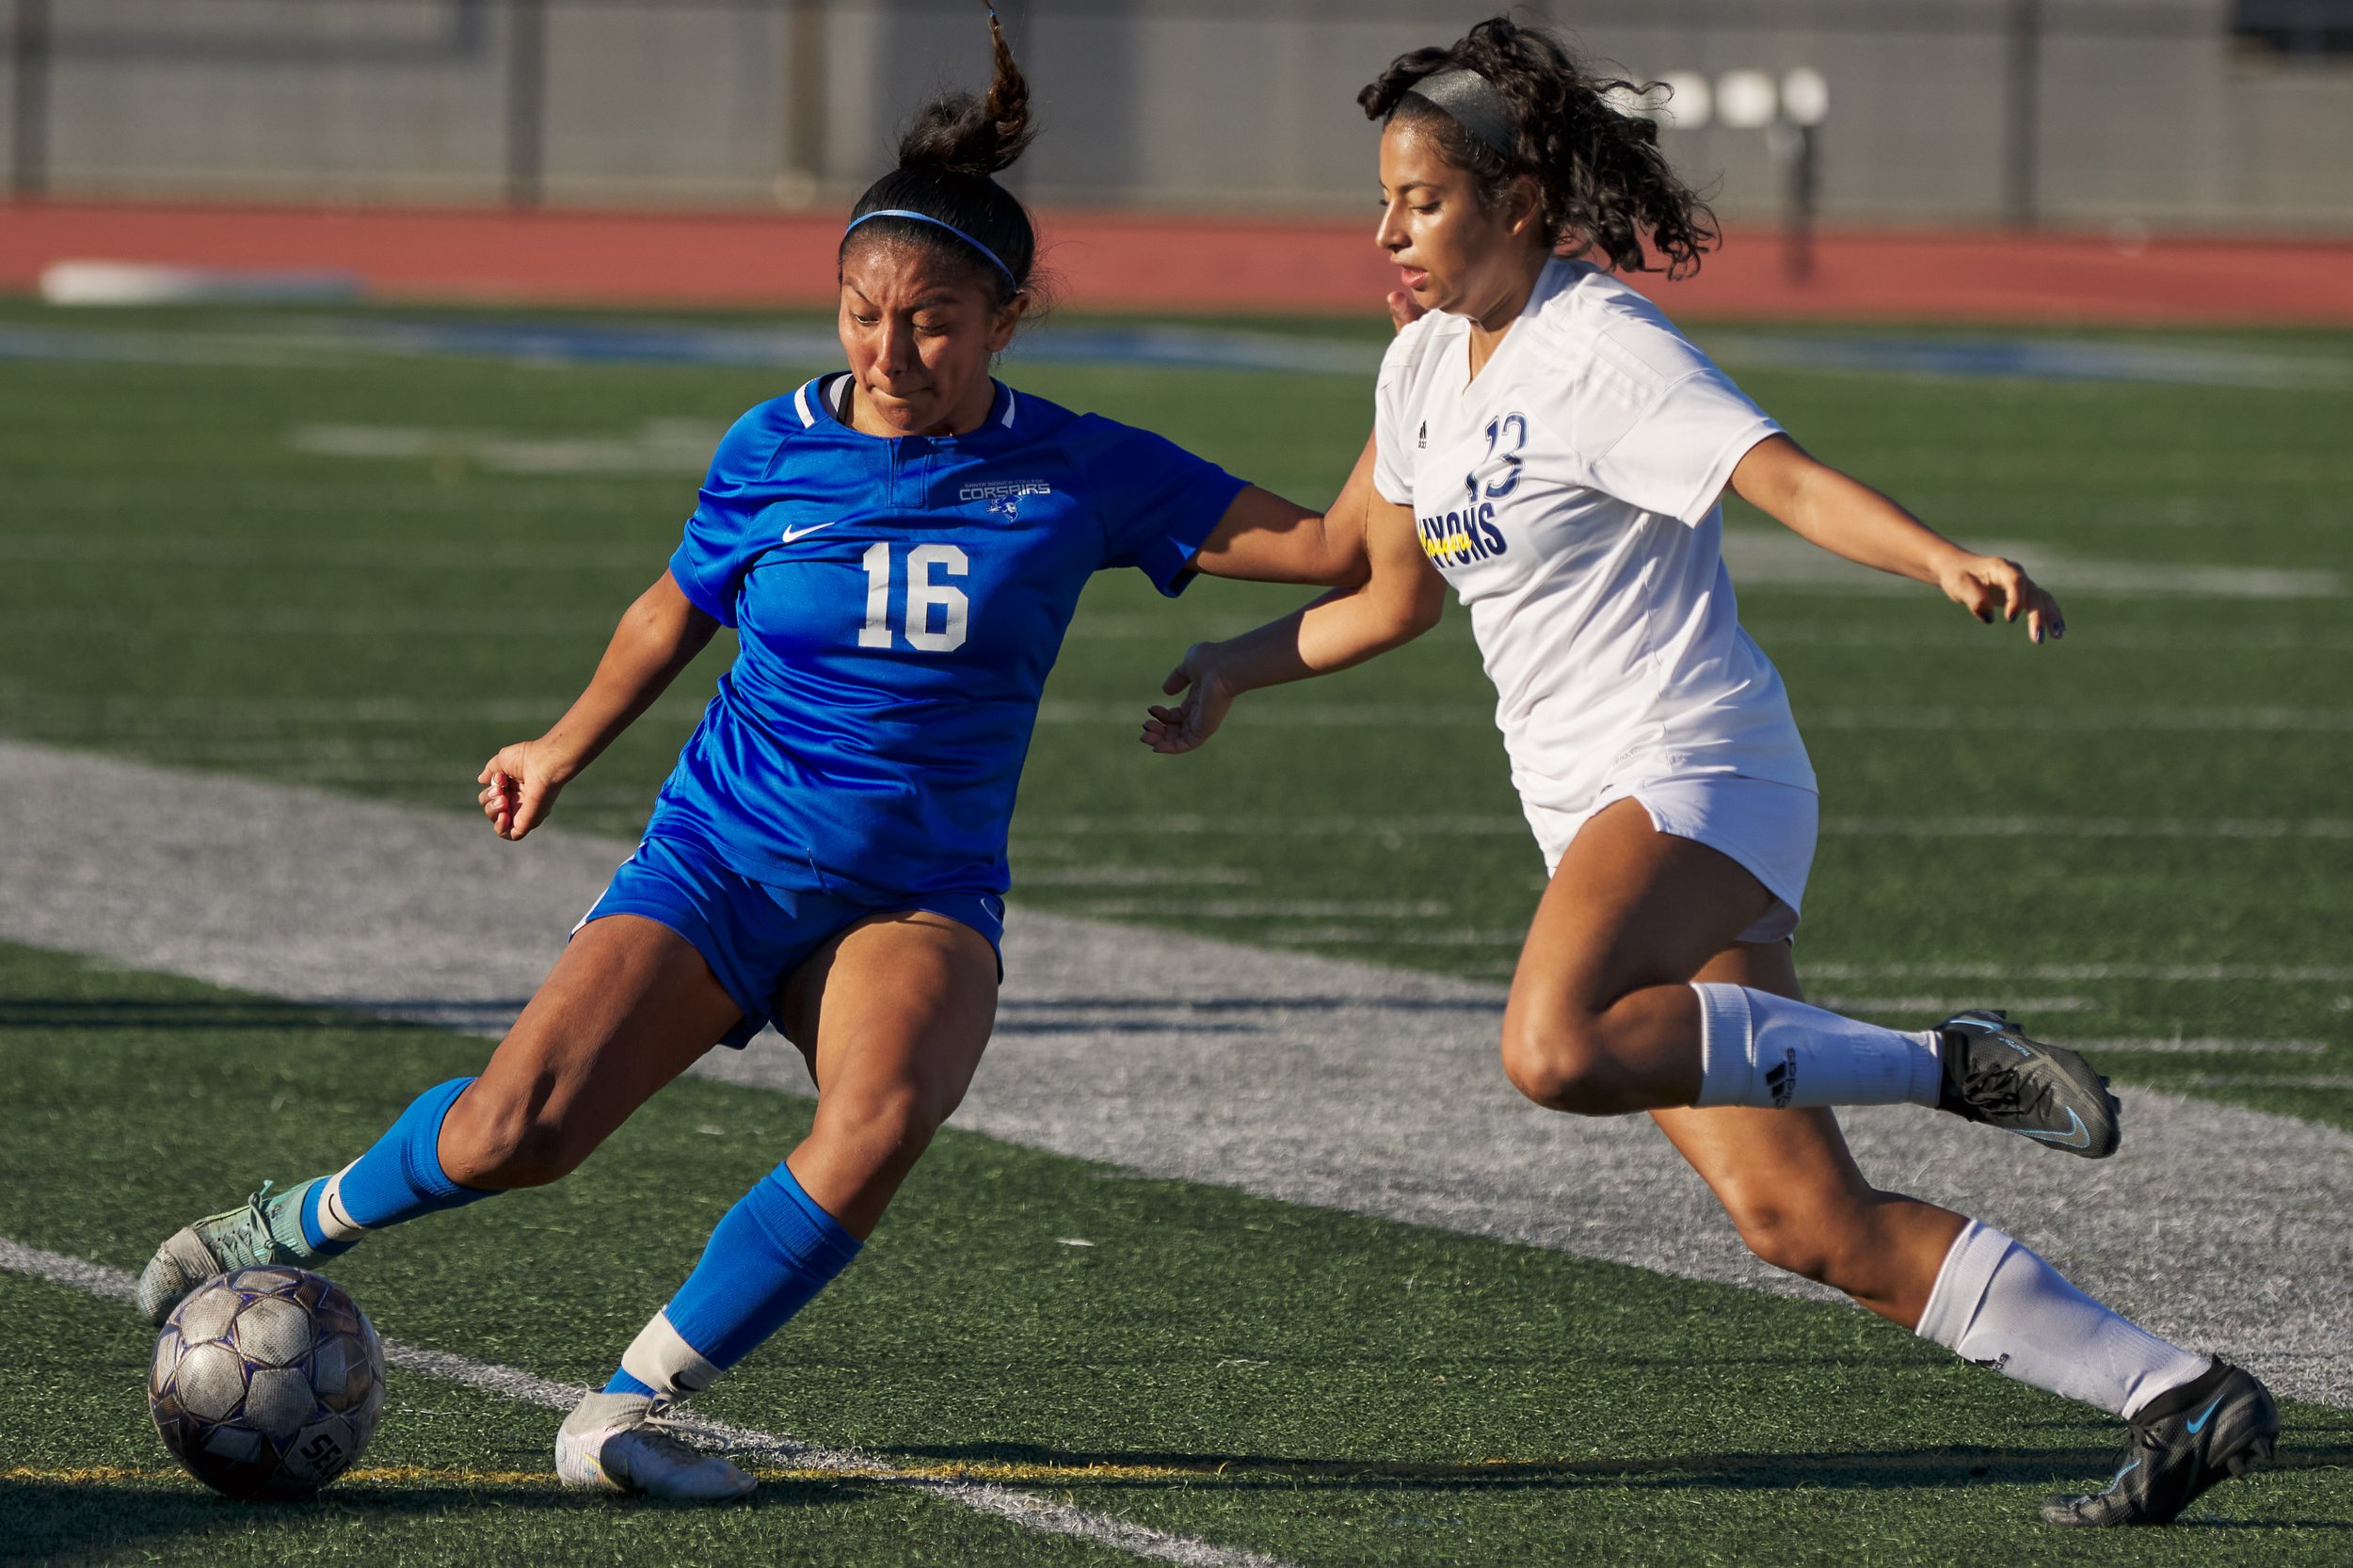  Santa Monica College Corsairs' Diana Gaspar kicks the ball away from College of the Canyons Cougars' Natalia Zuluaga Ramirez during the women's soccer match on Thursday, Nov. 10, 2022, at Corsair Field in Santa Monica, Calif. The Corsairs lost 3-0. 